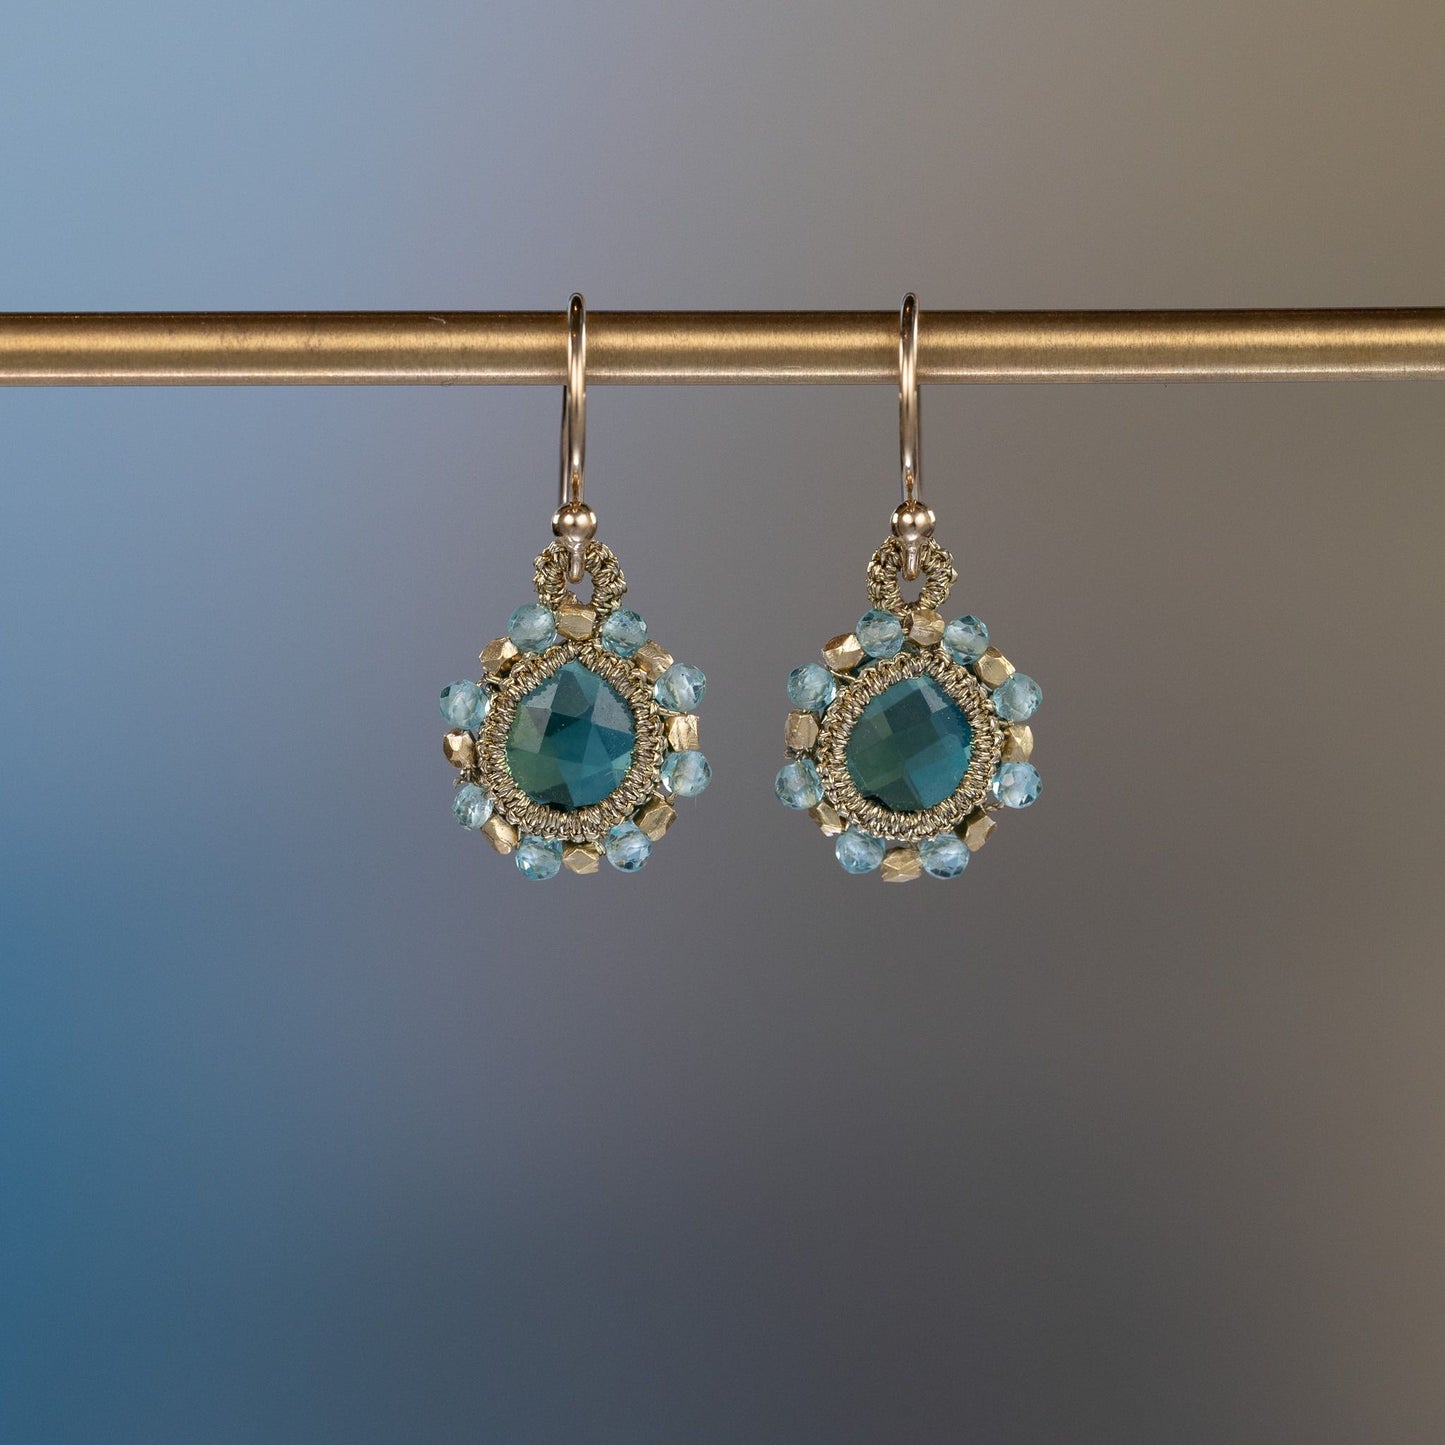 Load image into Gallery viewer, Danielle Welmond Caged Aqua Quartz With Apatite and Nugget Orbit Earrings
